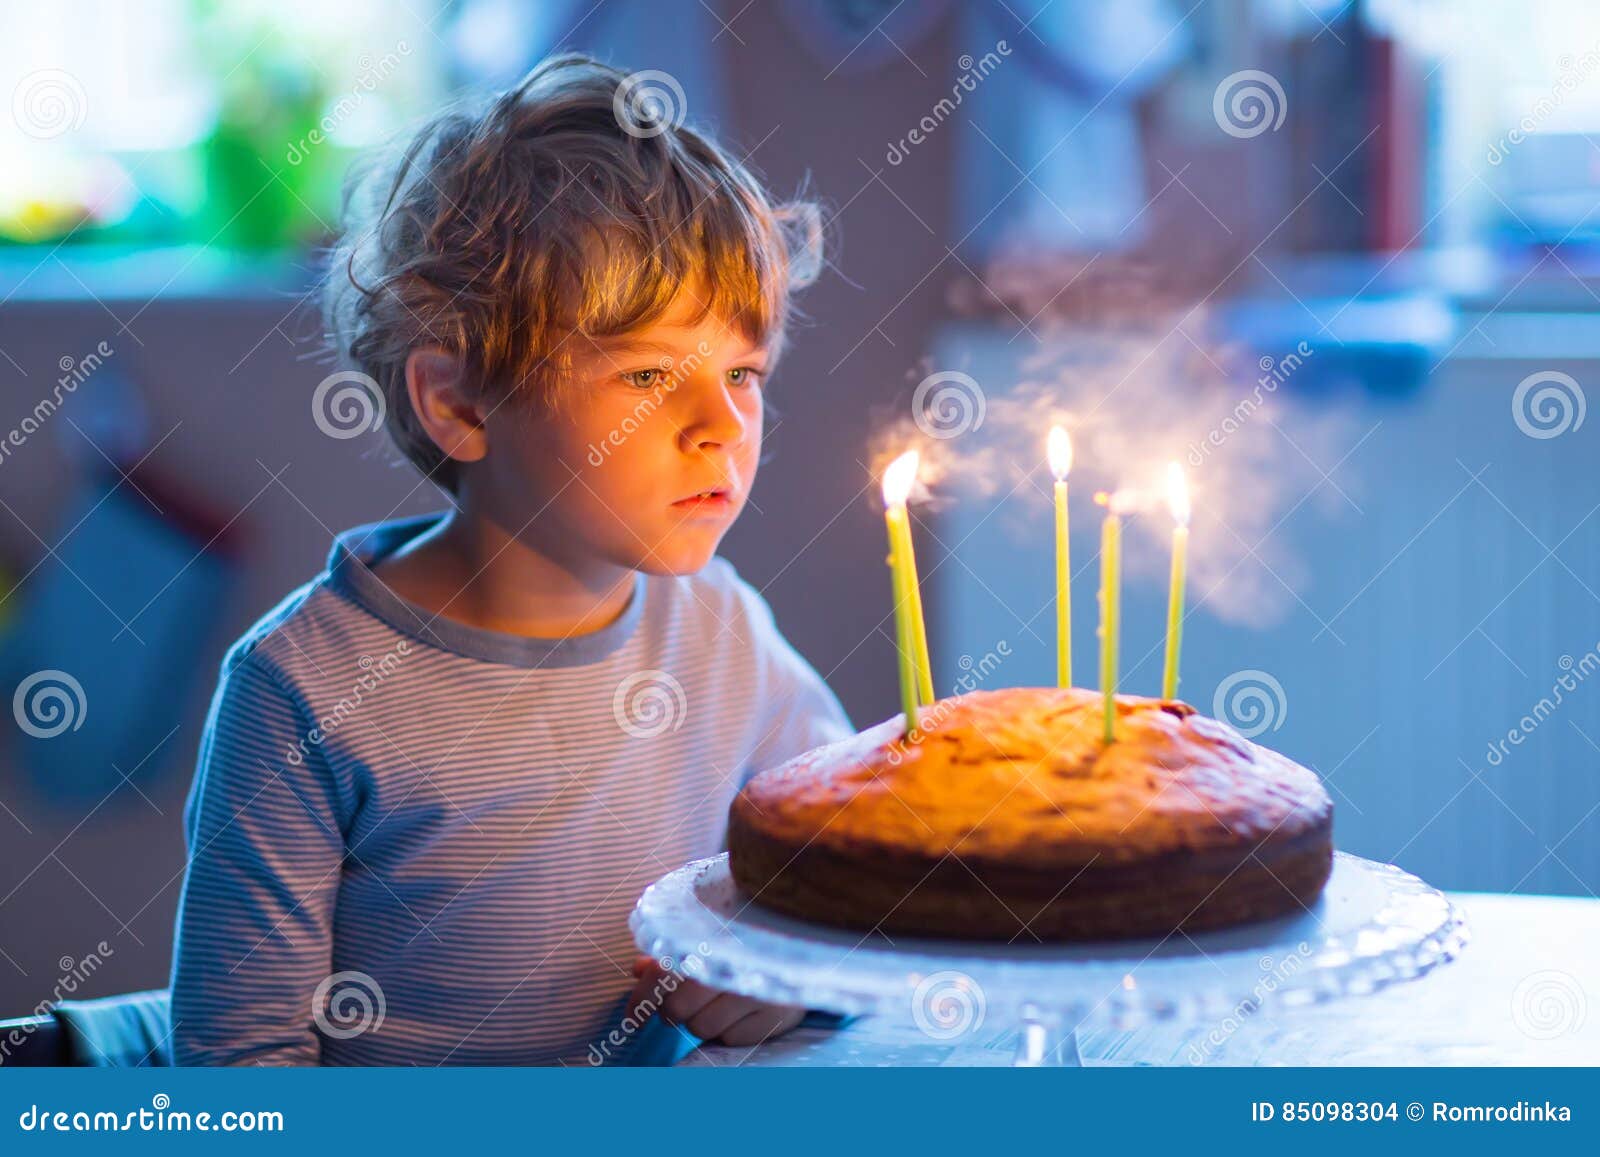 Little Kid Boy Celebrating His Birthday and Blowing Candles on Cake ...